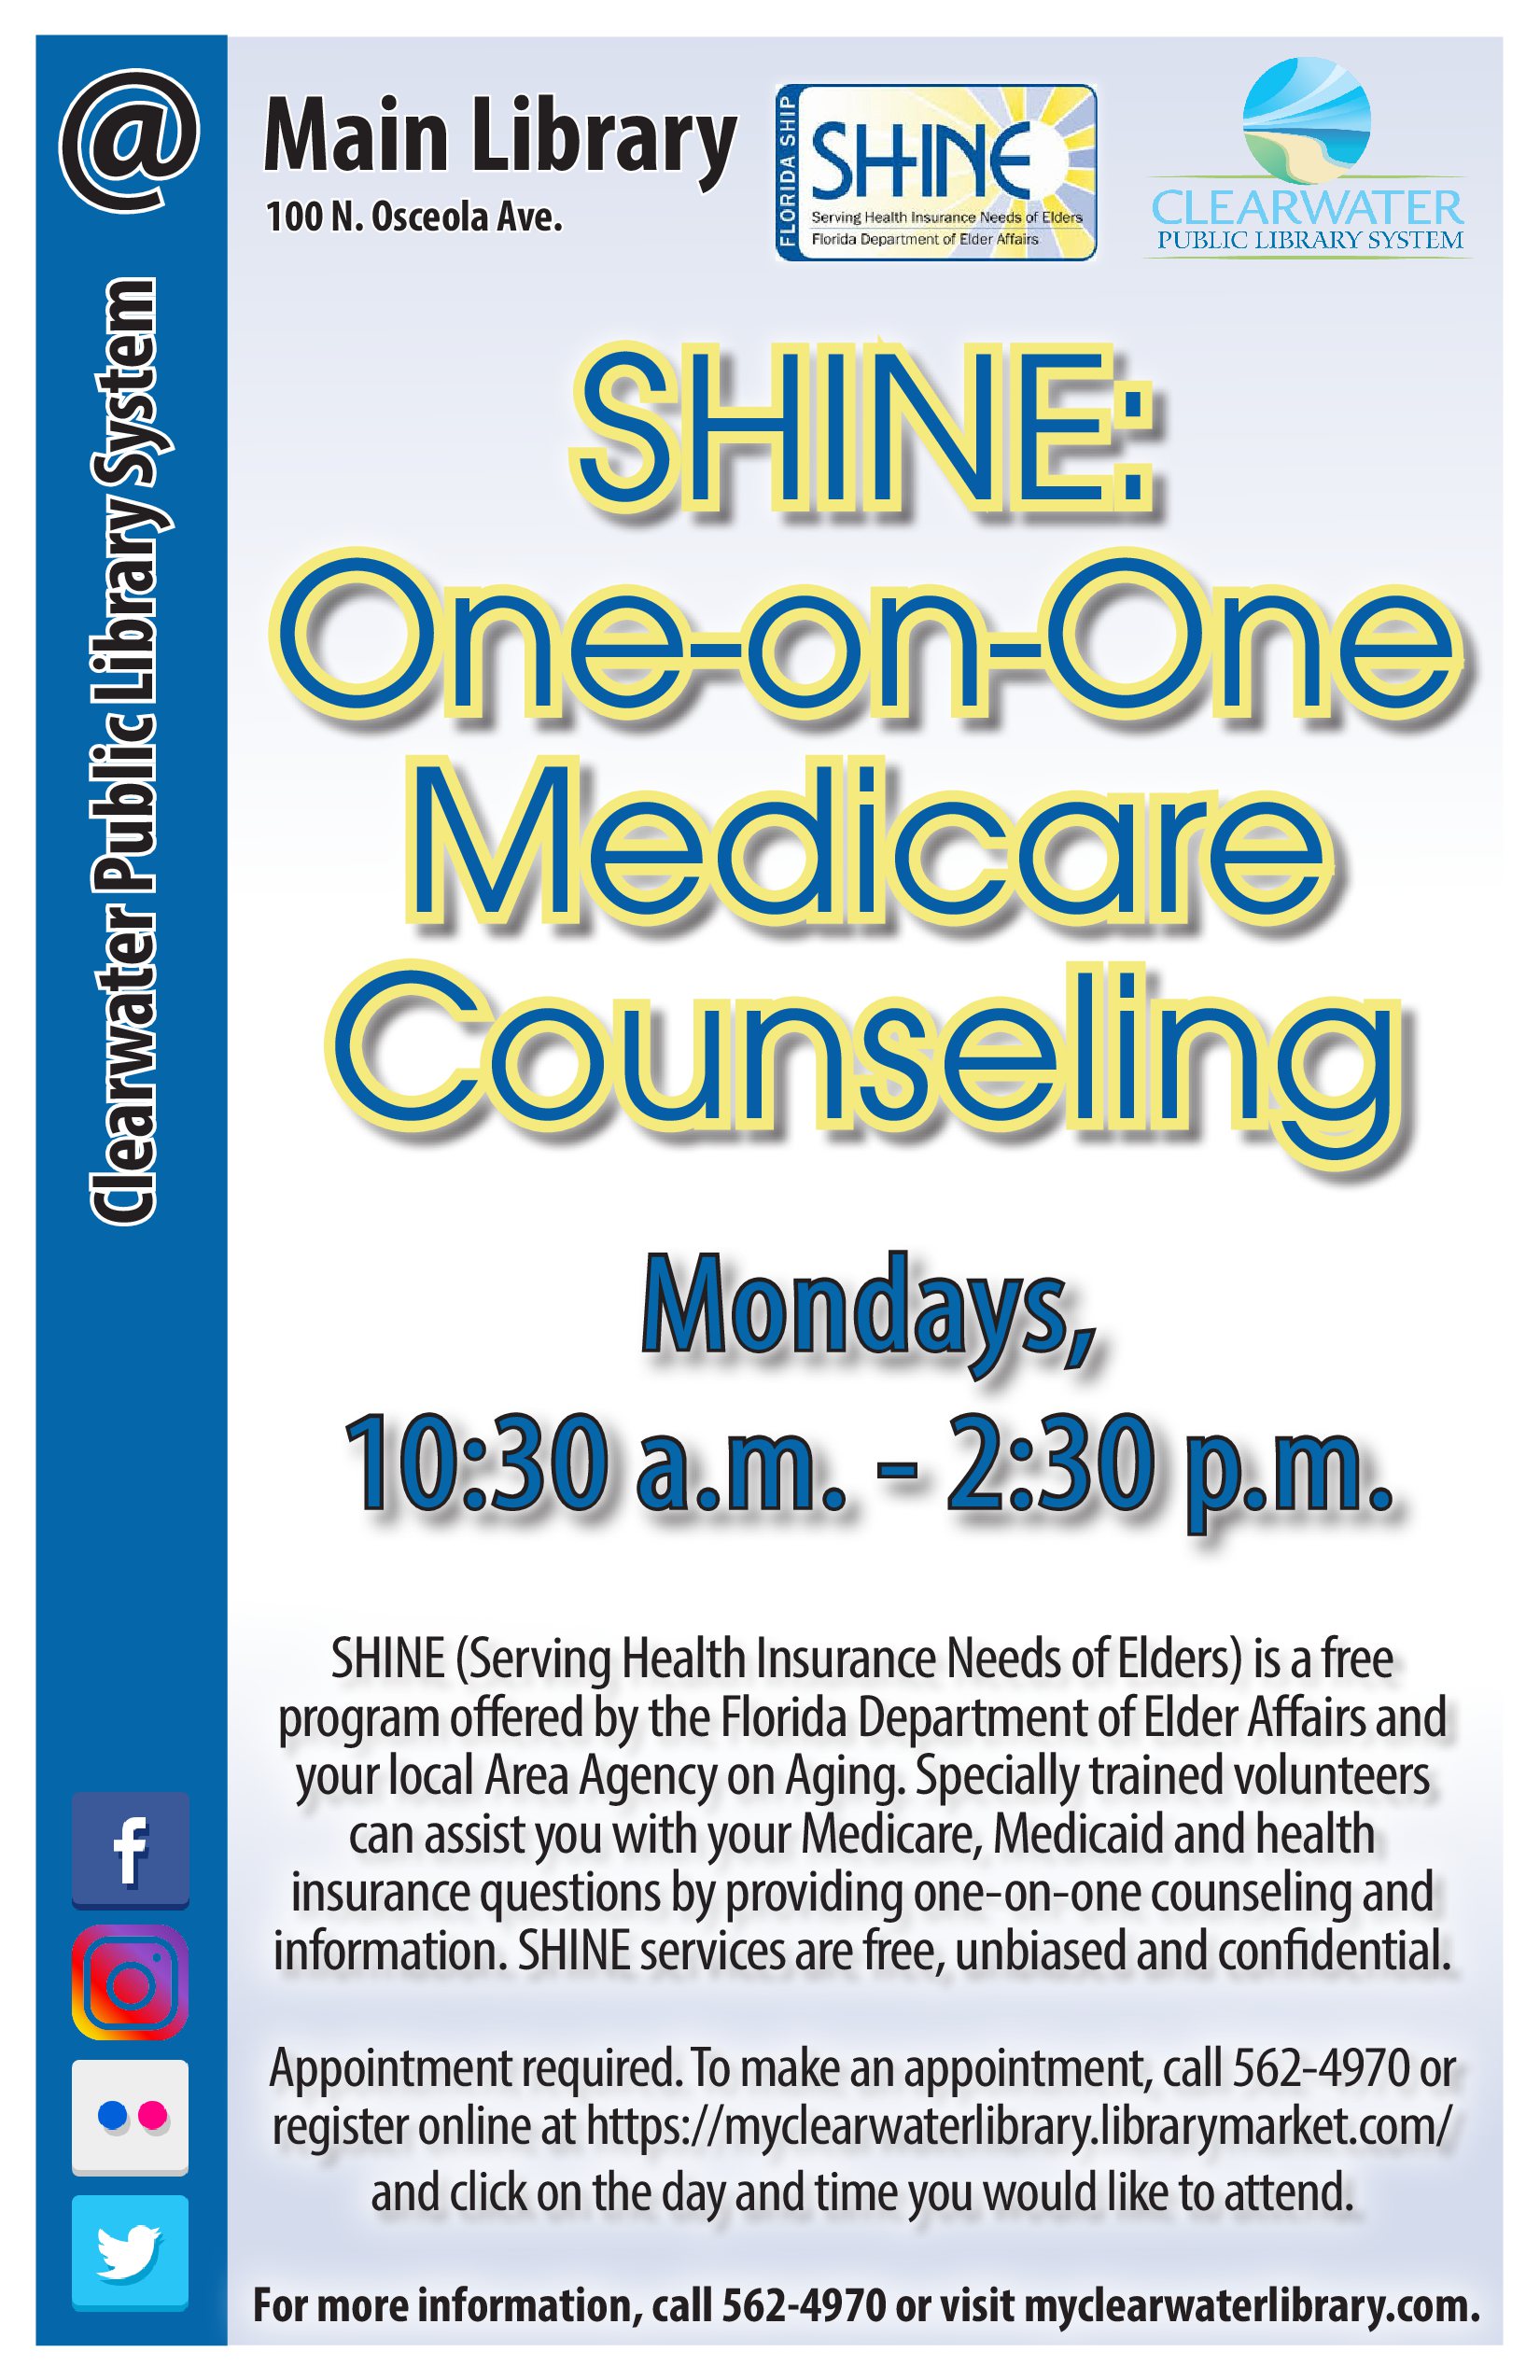 SHINE @ Main One-on One Medicare Counseling